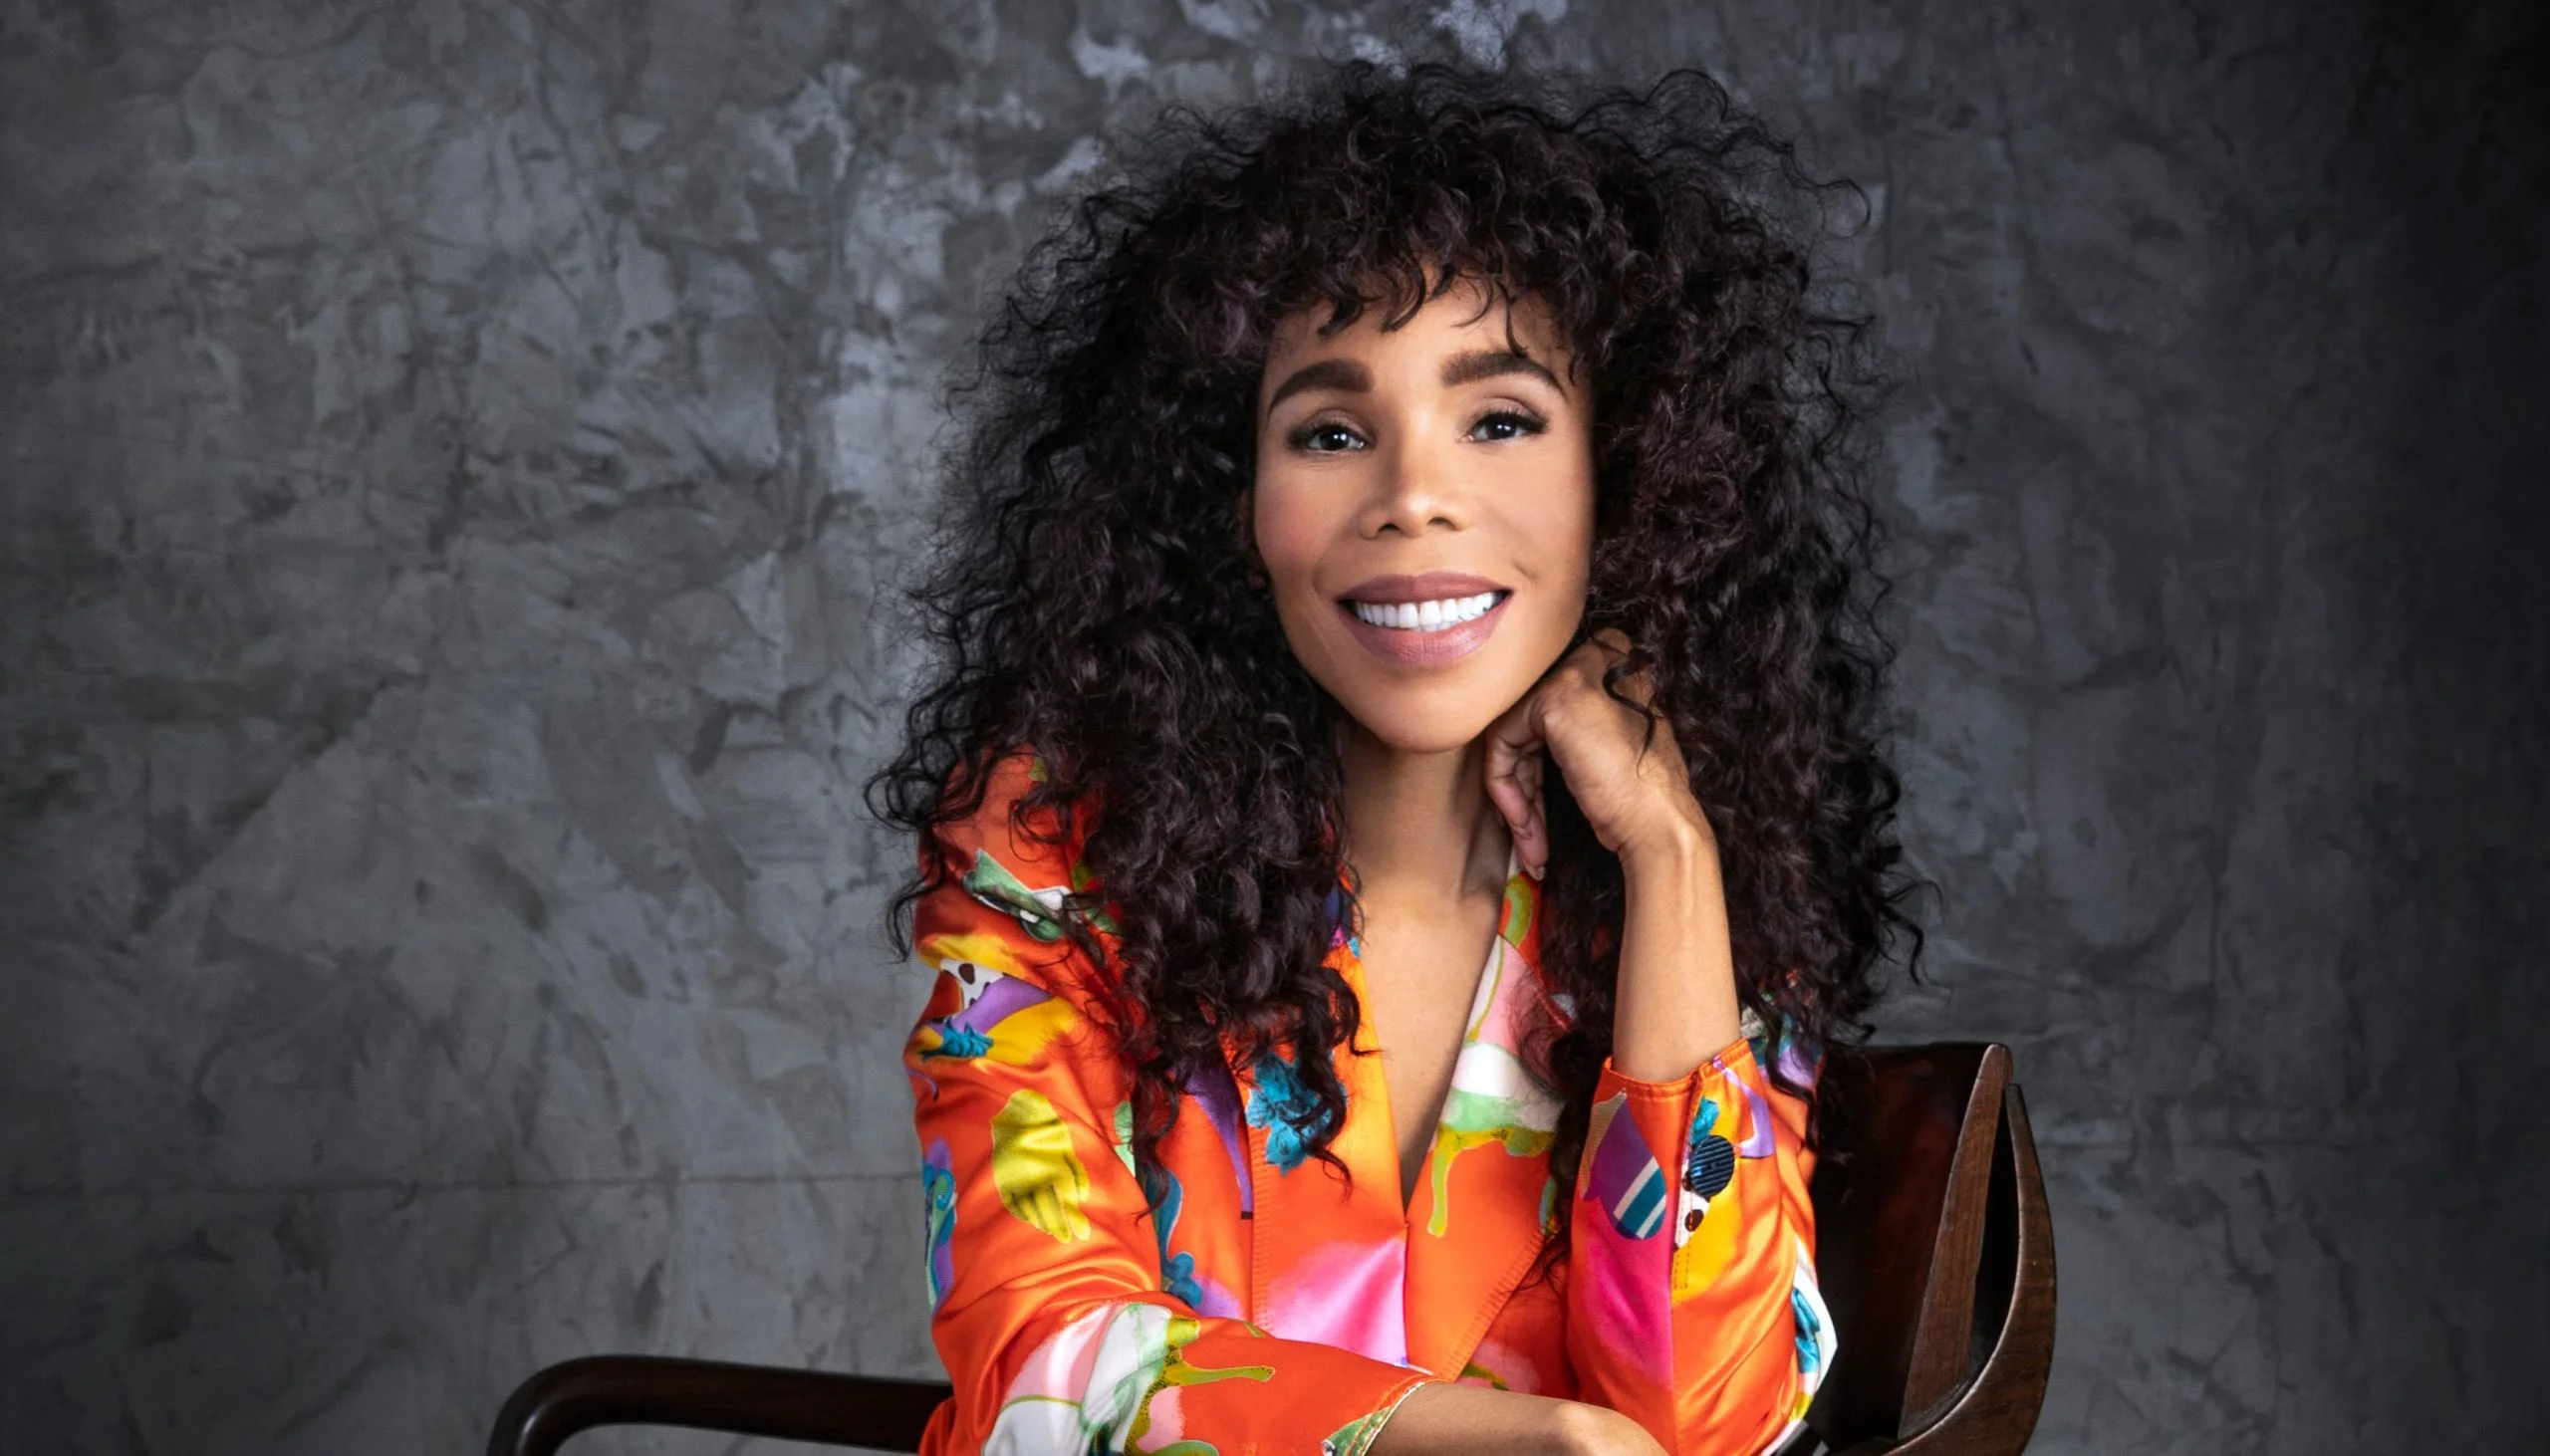 Bob Marley’s ‘Is This Love’ inspires Cedella Marley’s new children’s book